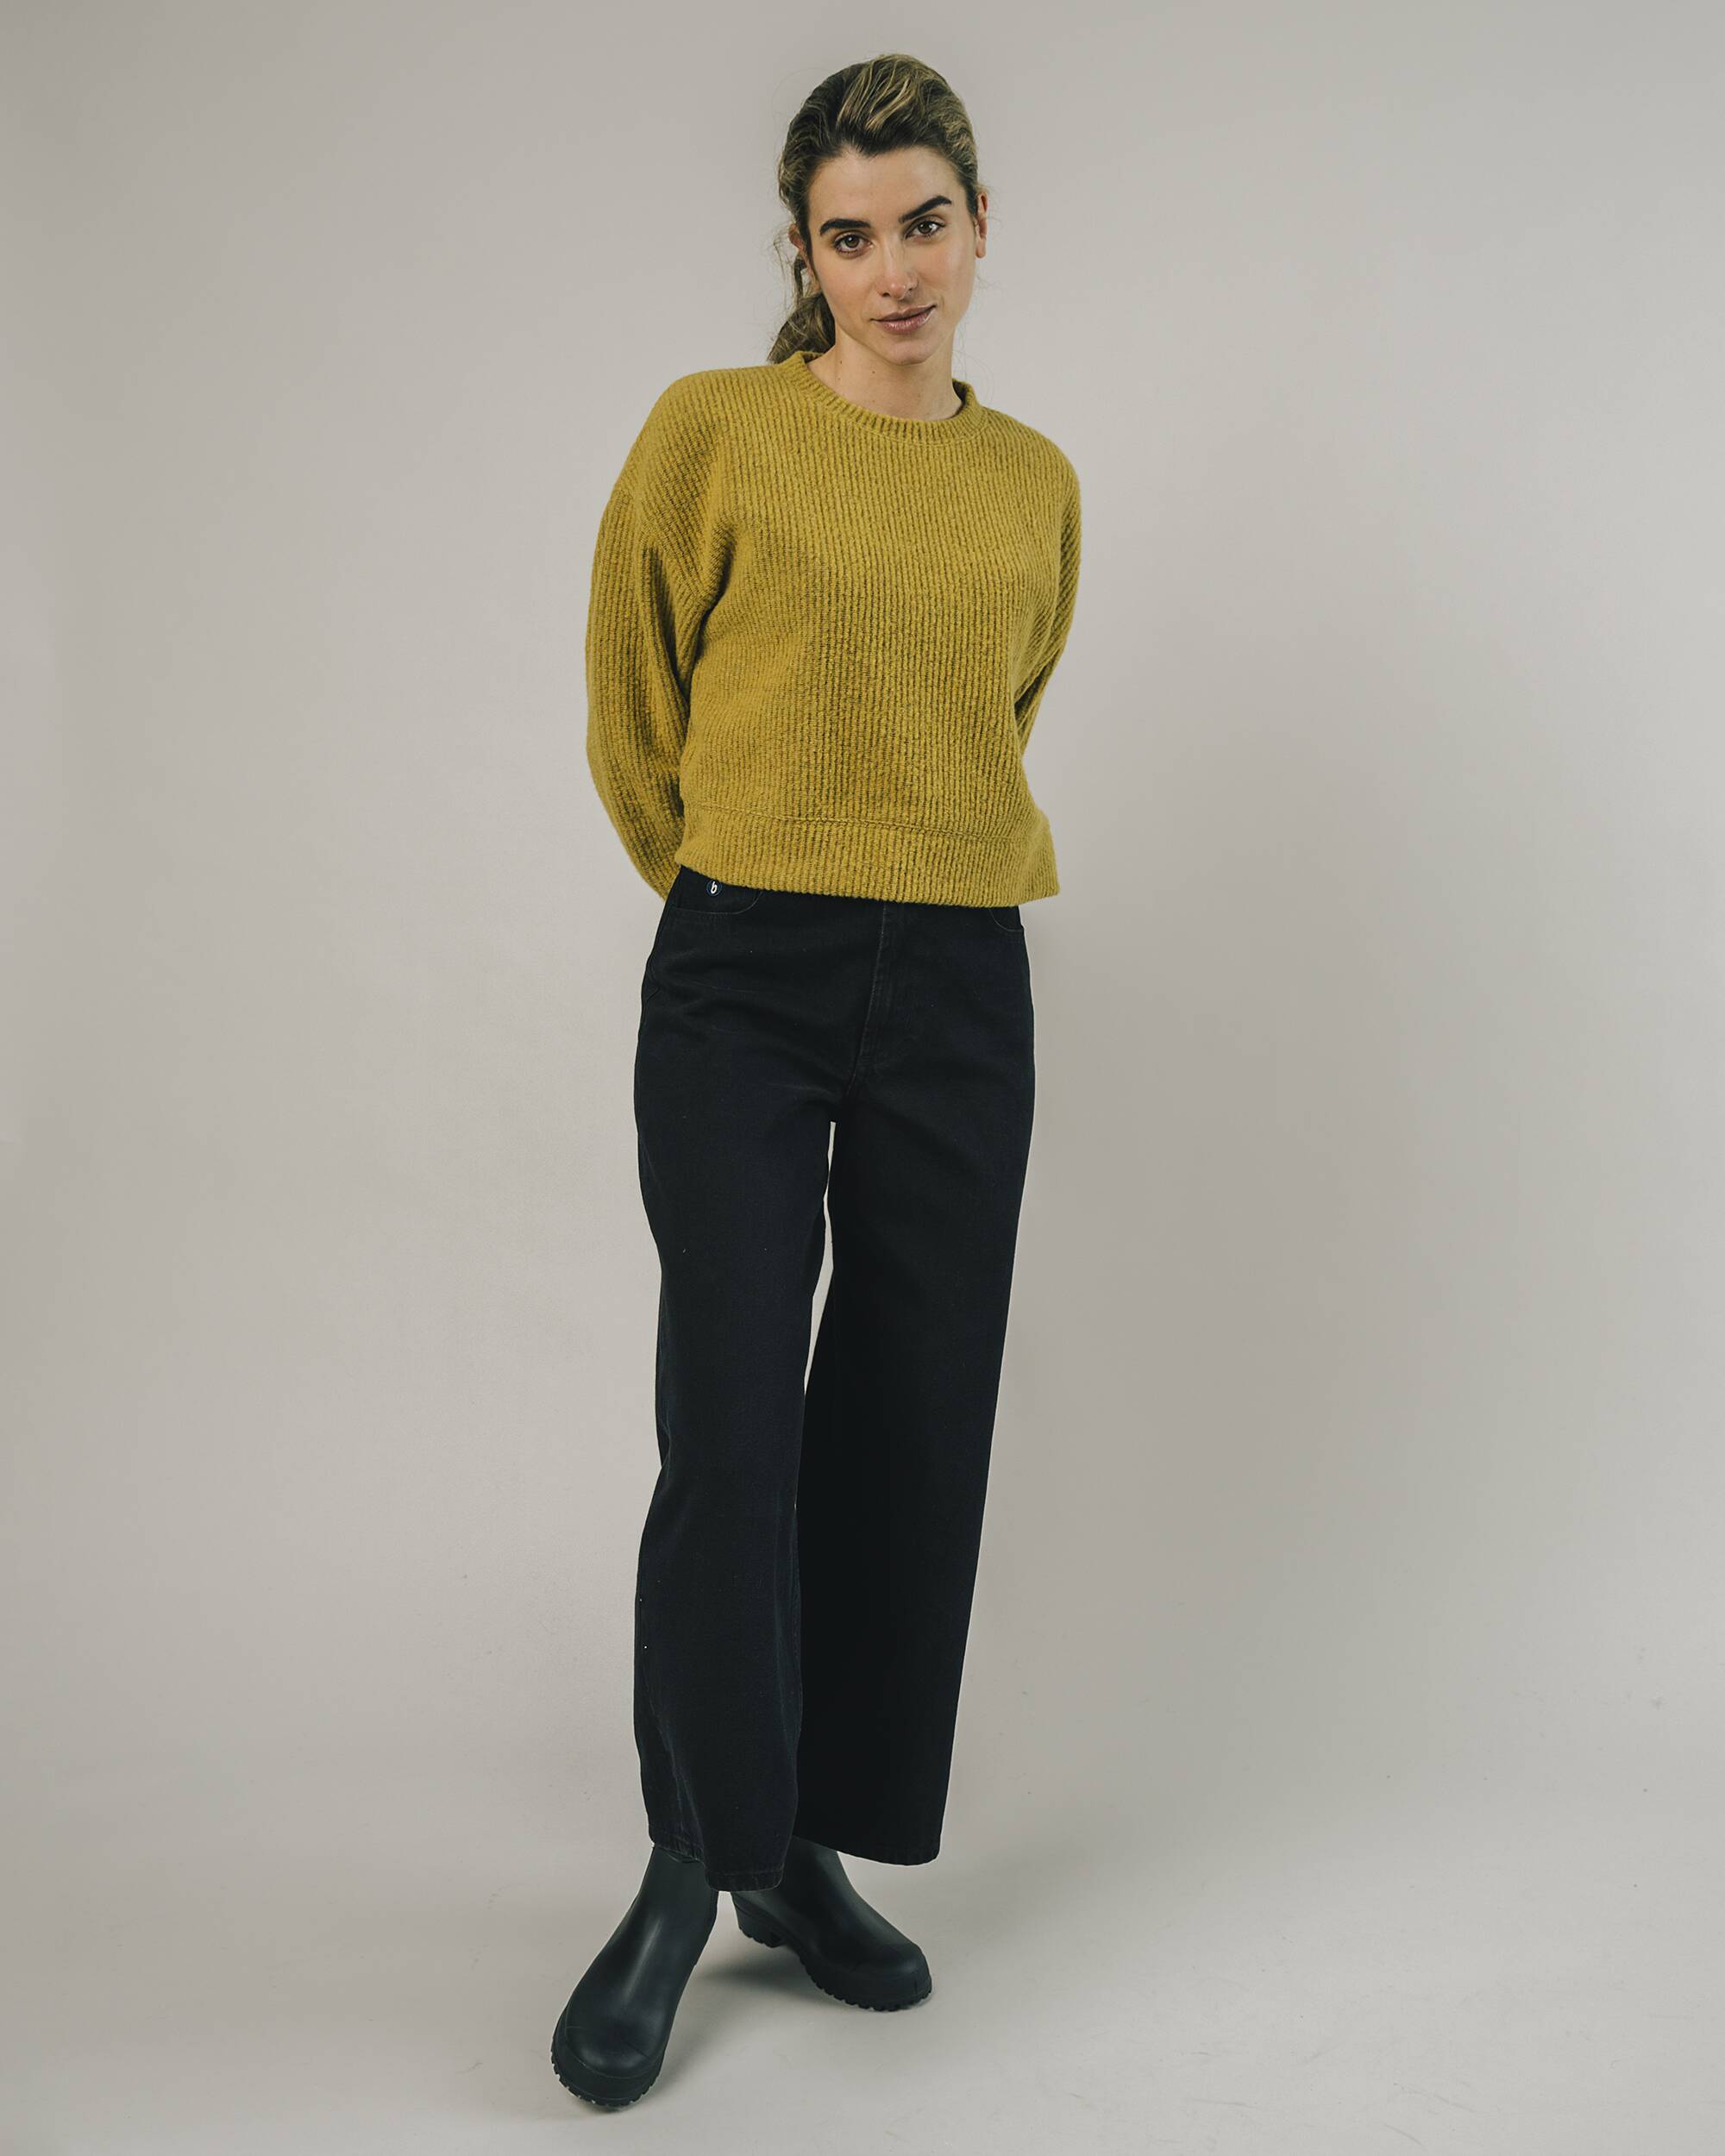 Cropped sweatshirt in mustard - yellow made from 100% recycled materials from Brava Fabrics